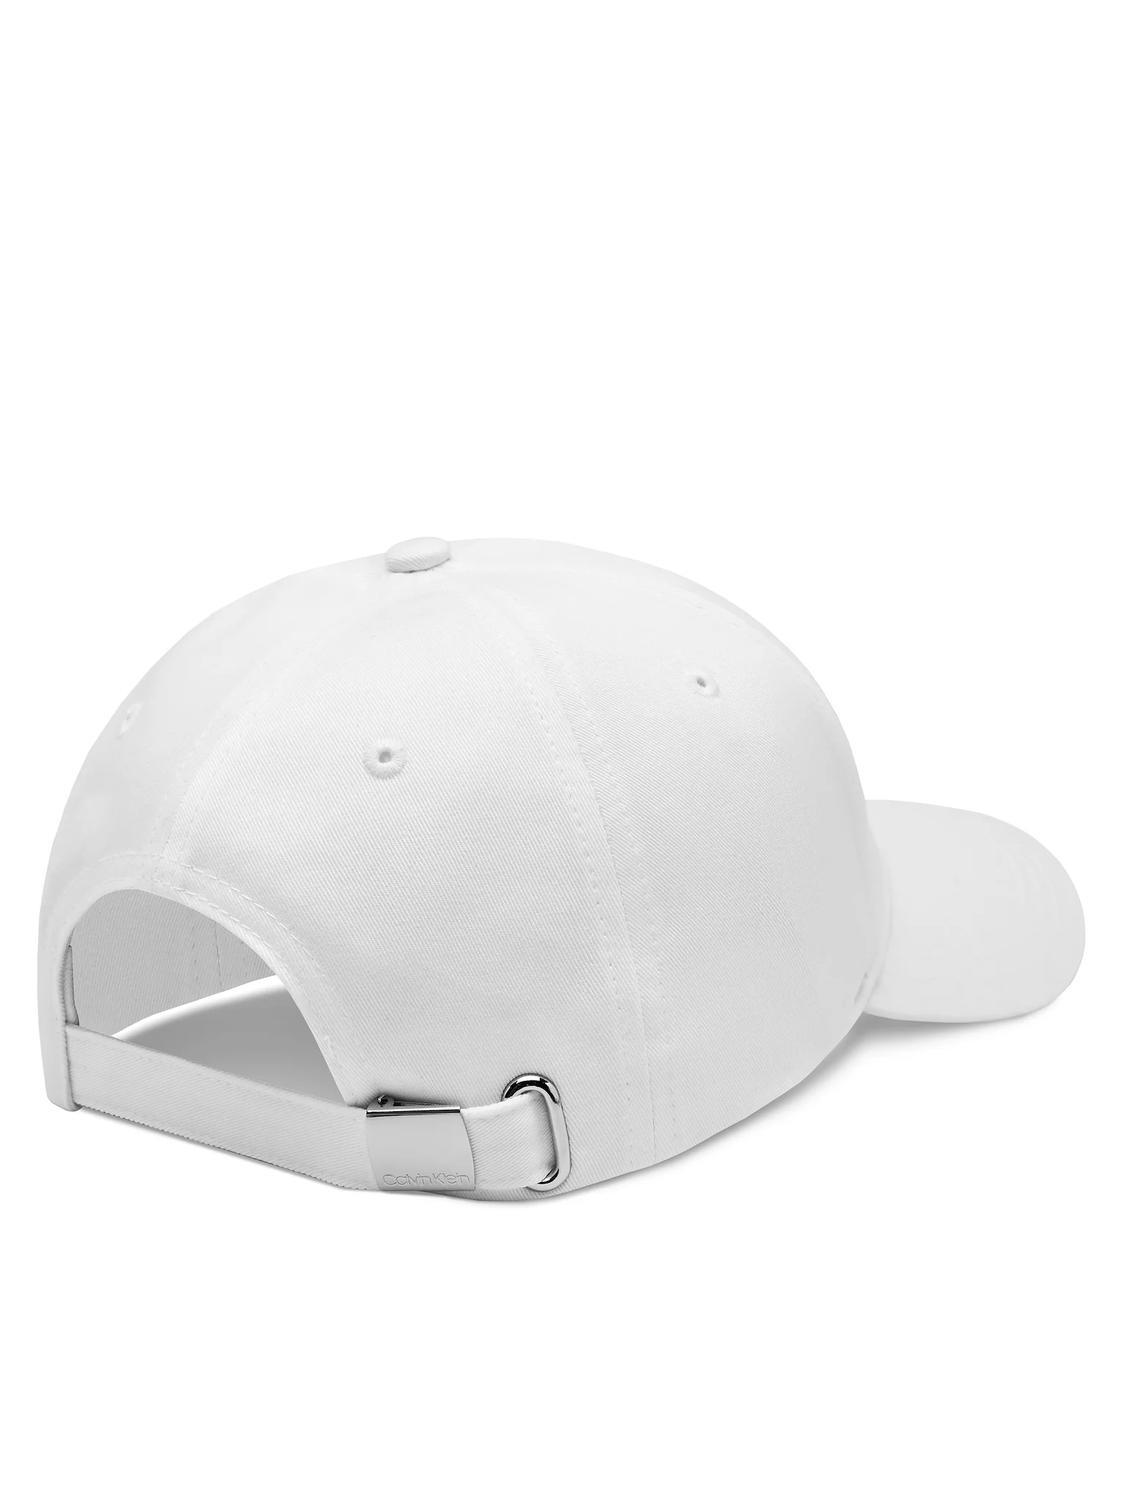 Calvin Klein Tonal Rubber Patch Baseball Hat Ck White - Buy At Outlet  Prices!